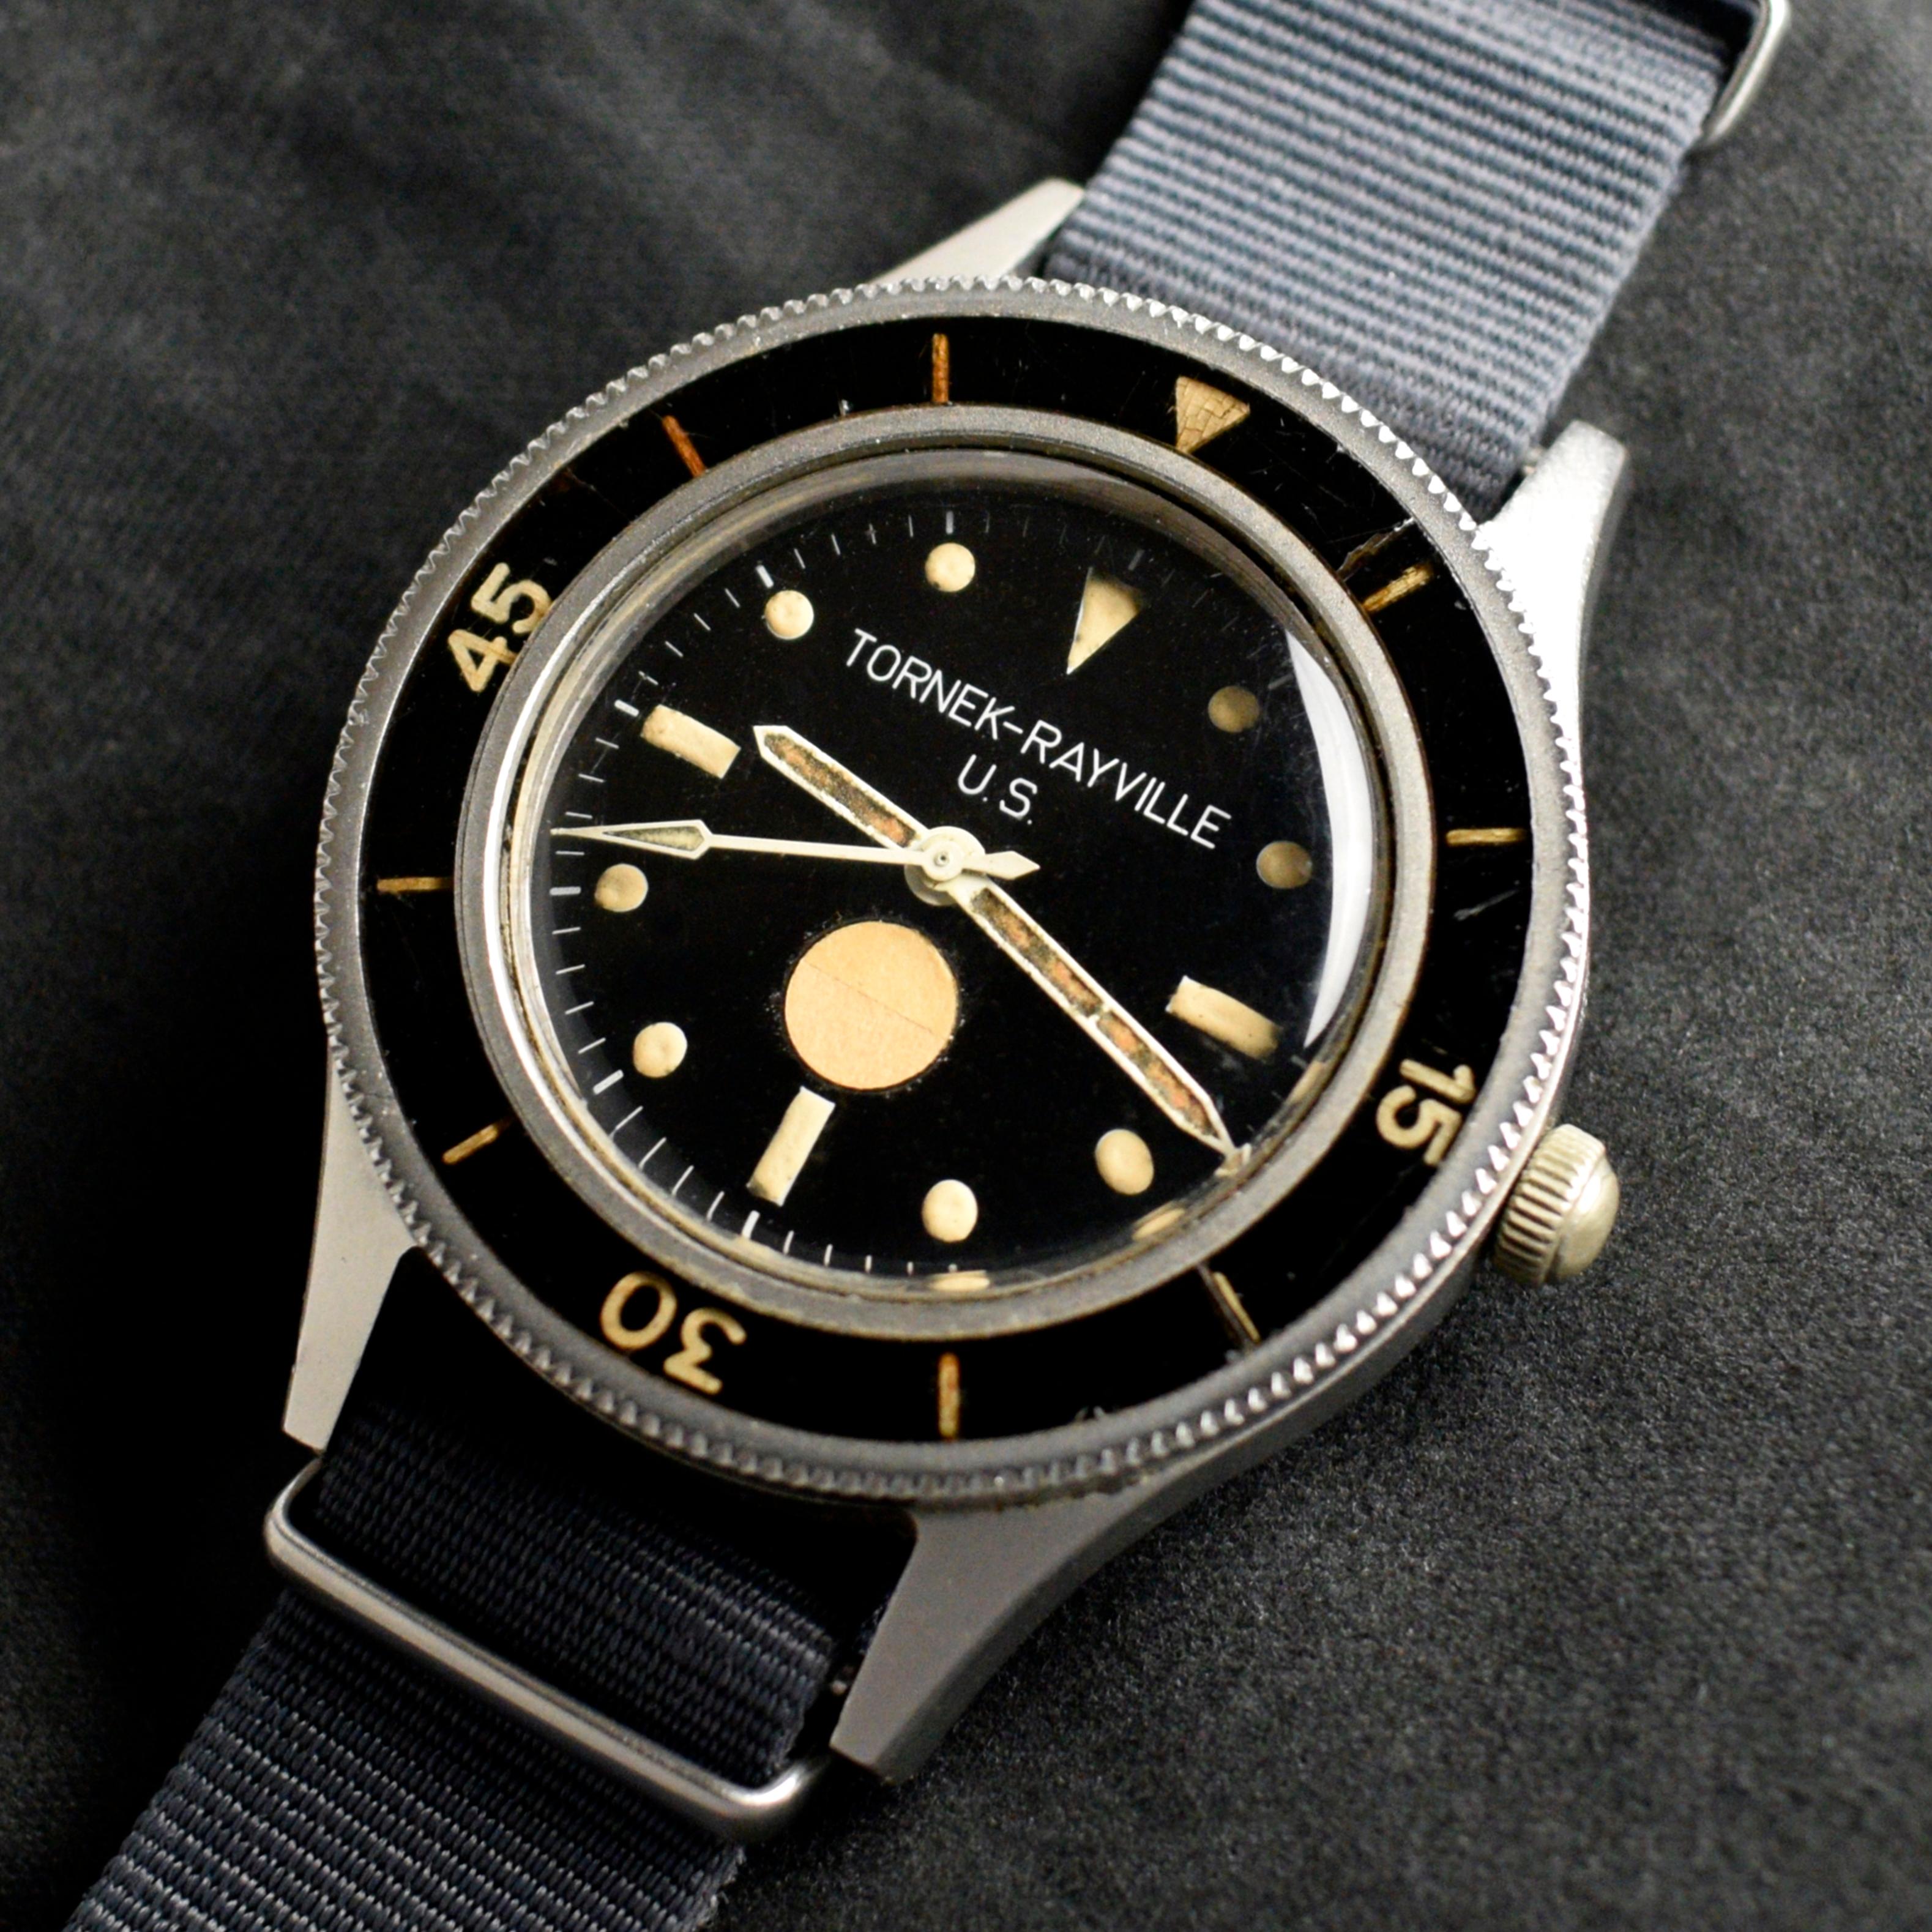 Brand: Vintage Blancpain
Model: TR900
Year: 1960’s
Serial number:
Reference: OT1629

In the world of watches, the first thing MIL-SPEC might make you think of is the Rolex Mil-sub. But in the early days of purpose-built dive watches, Rolex was